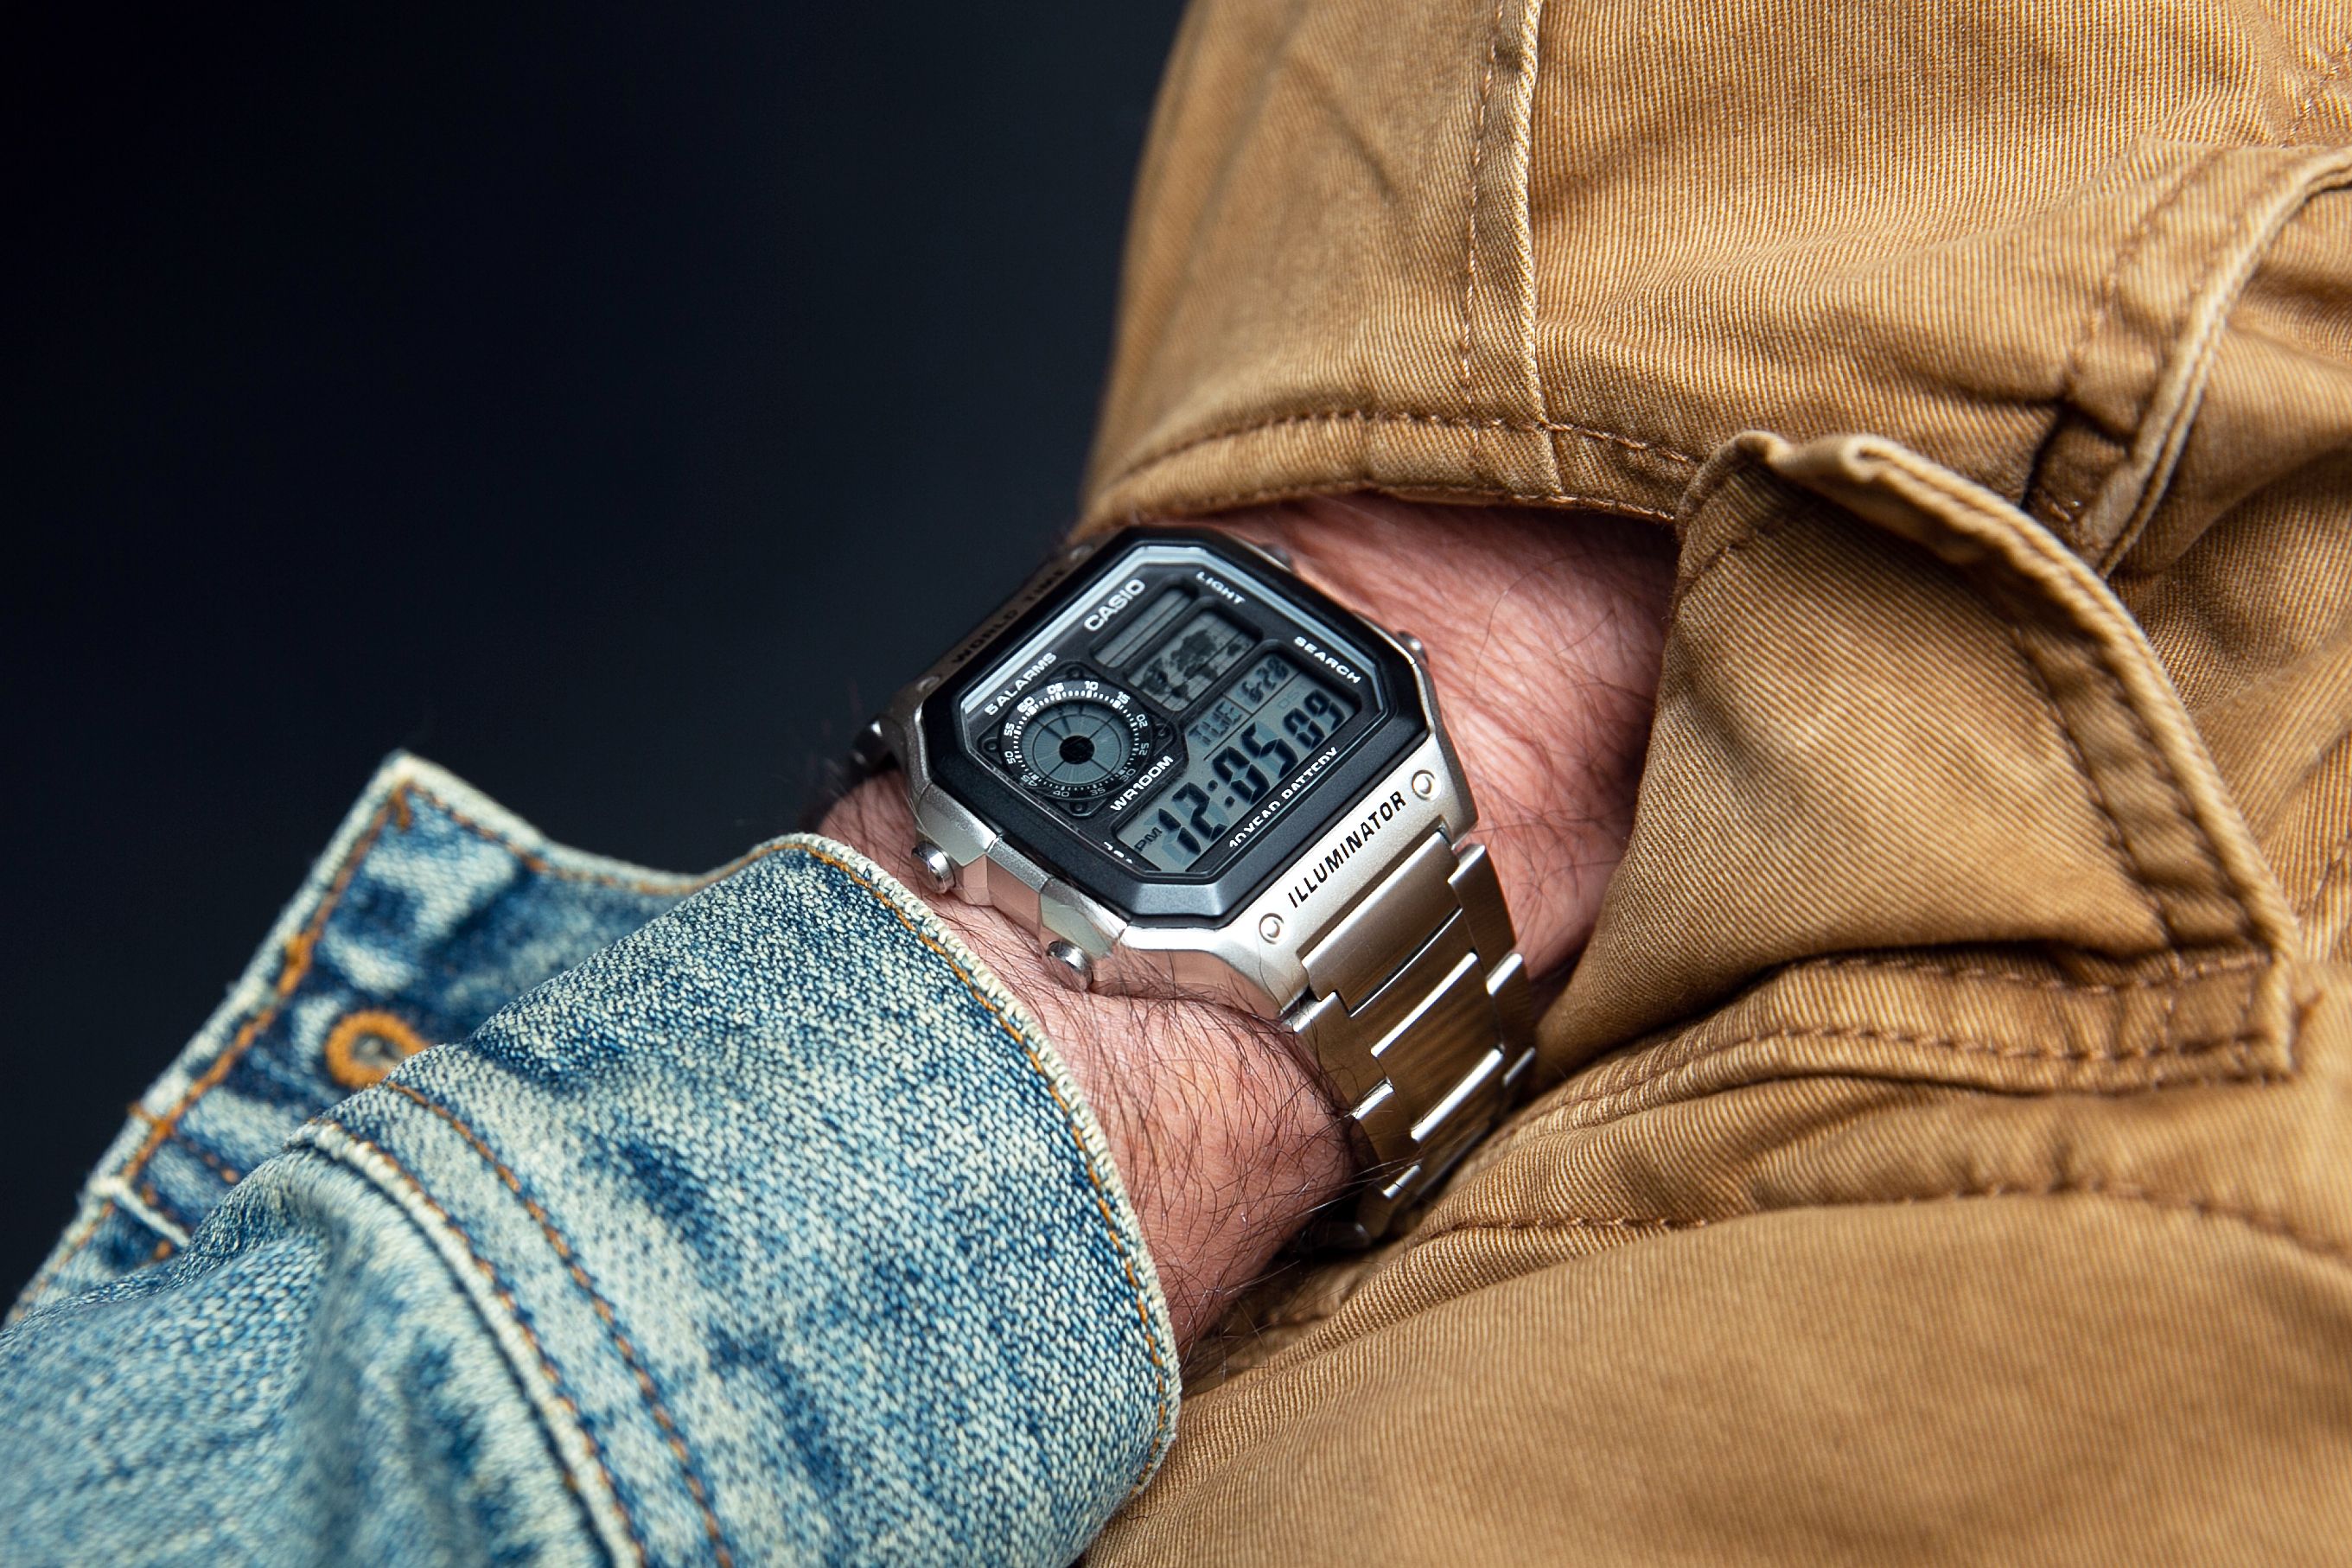 Casio World Time Review: The Affordable Digital Watch